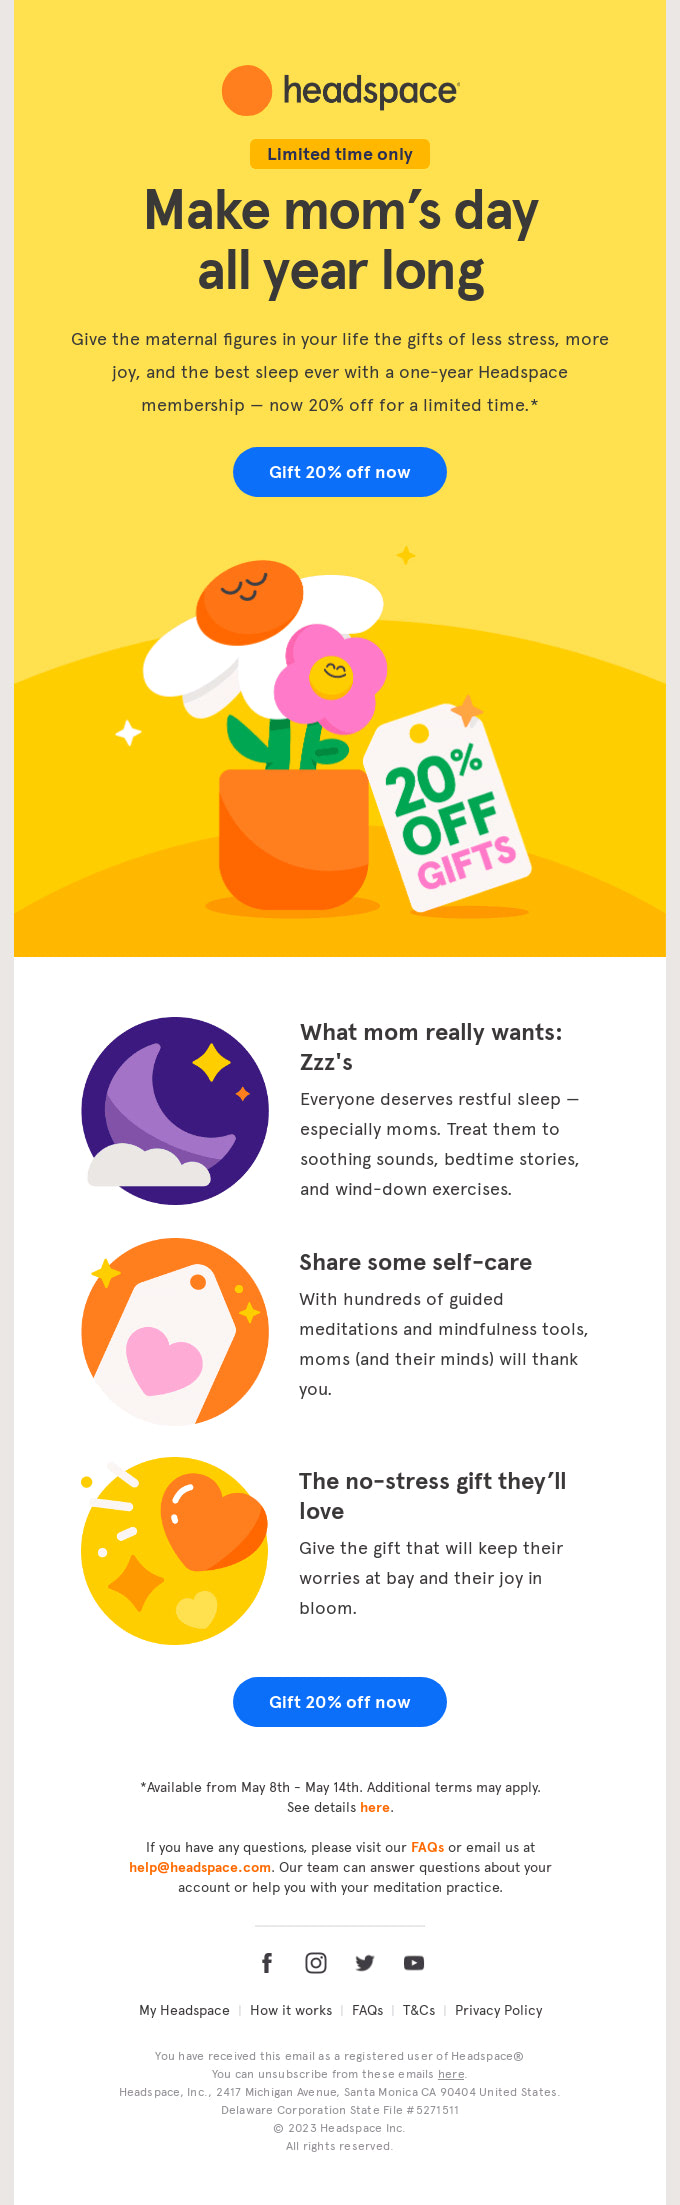 Email from Headspace